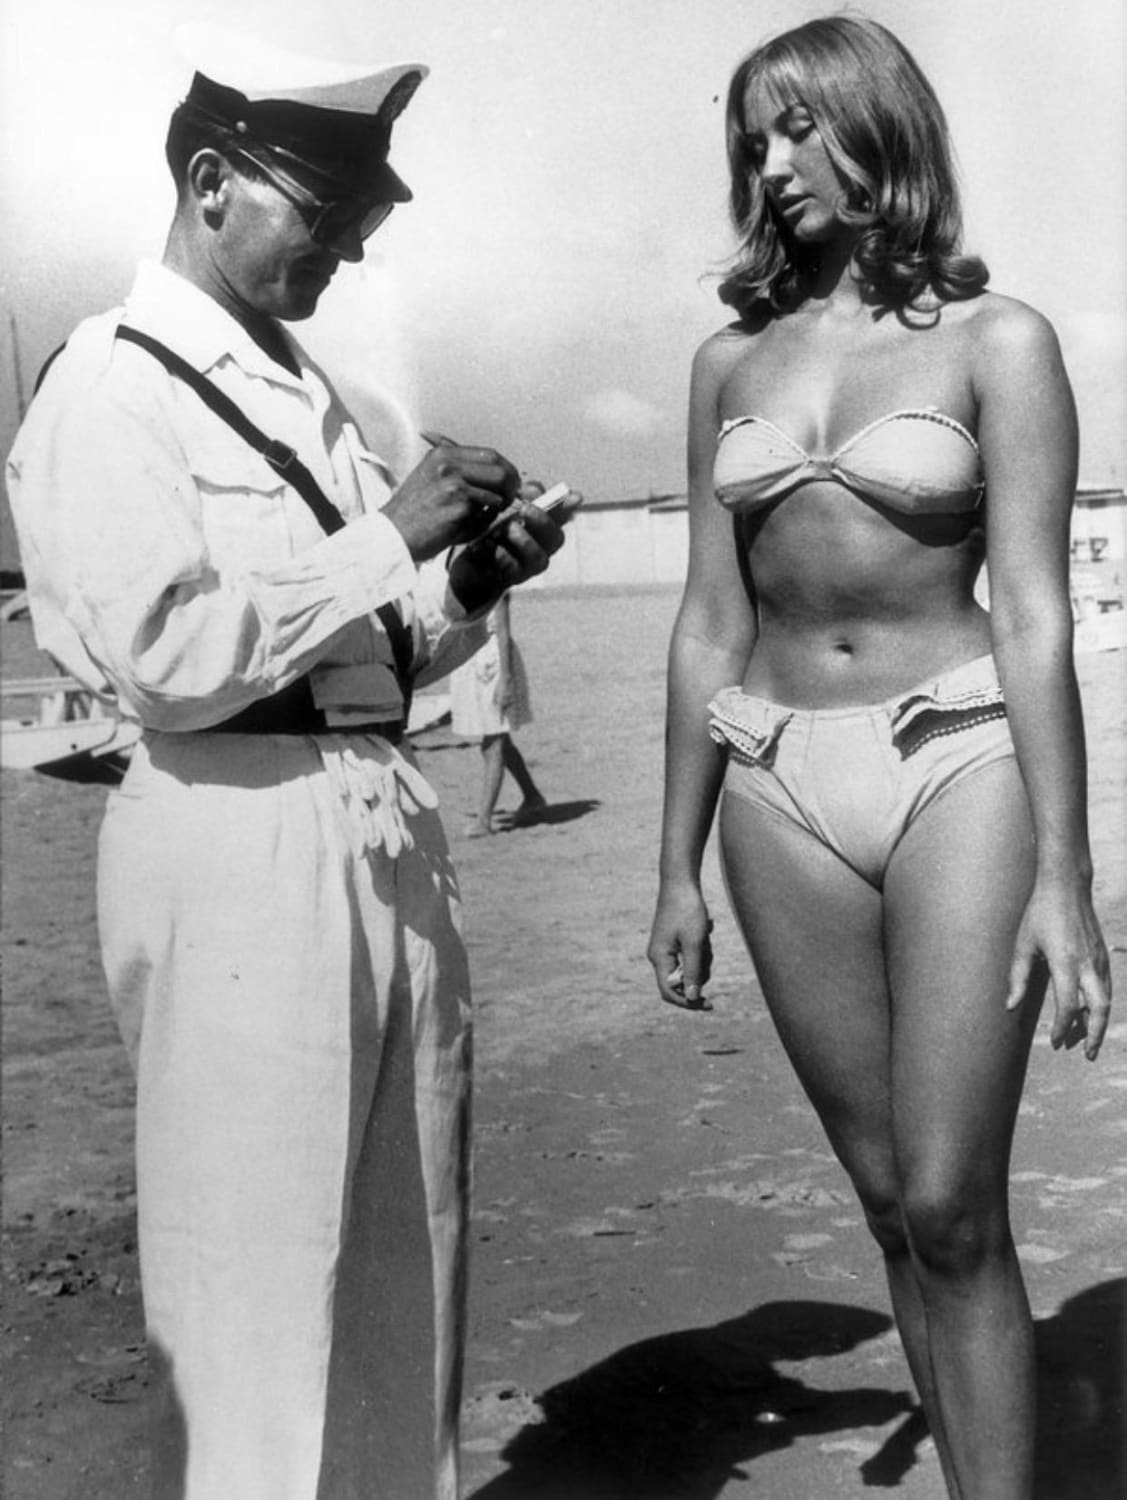 A police officer issuing a woman a ticket for wearing a bikini on a beach at Rimini, Italy, in 1957.